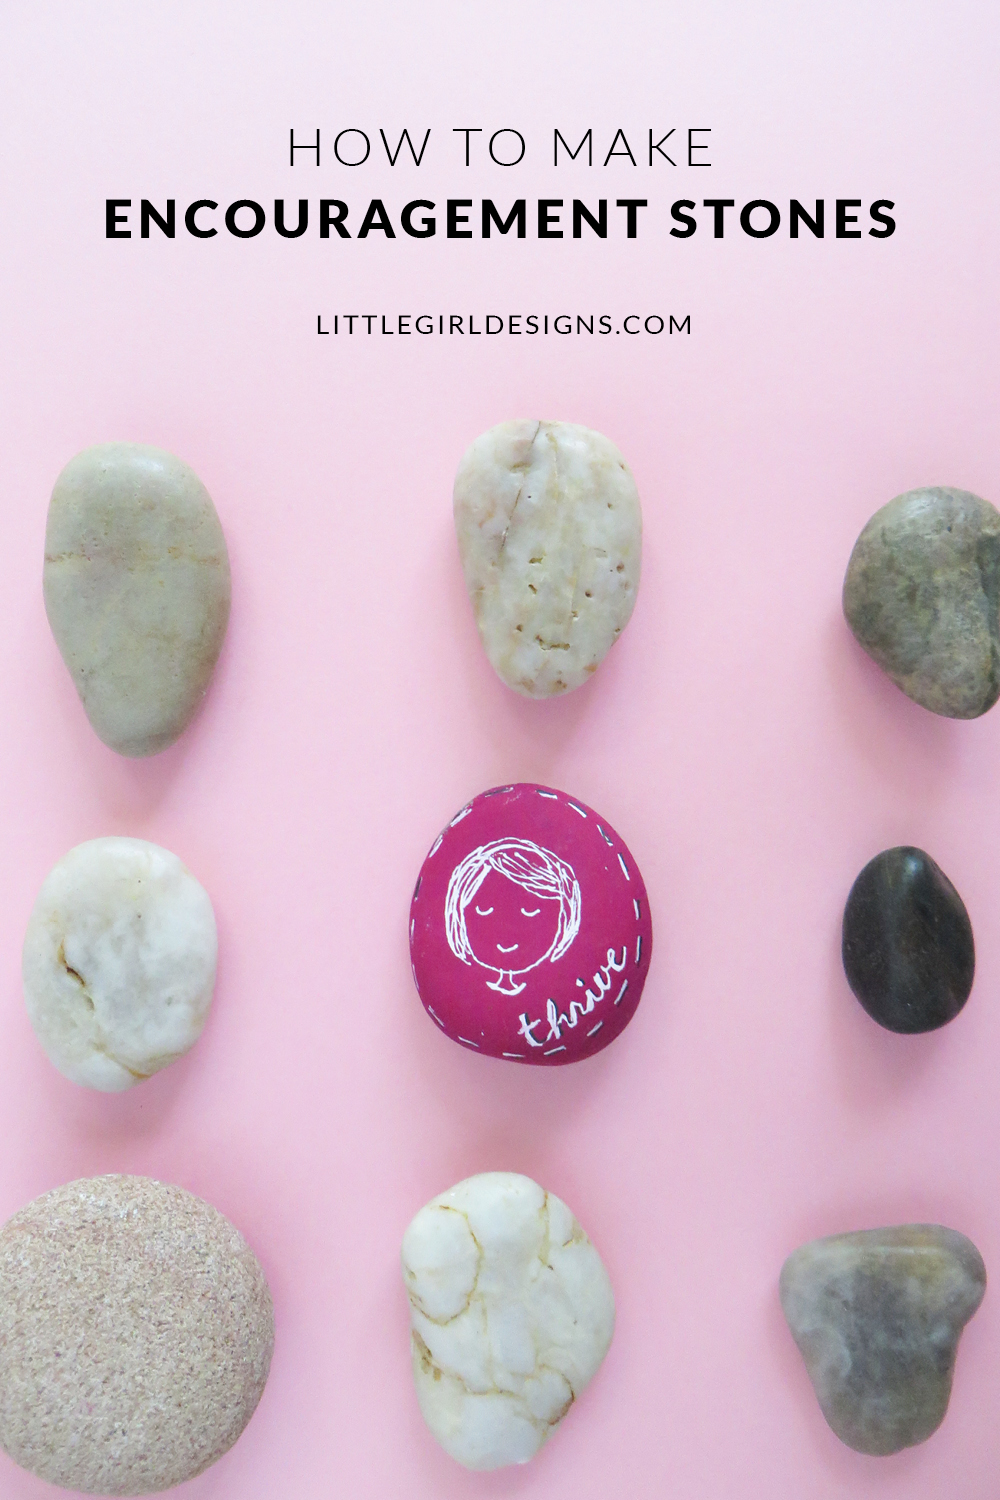 Encouragement Stones - Learn how writing out words on simple stones can do a transforming work in your life. Words really do have power. @ littlegirldesigns.com